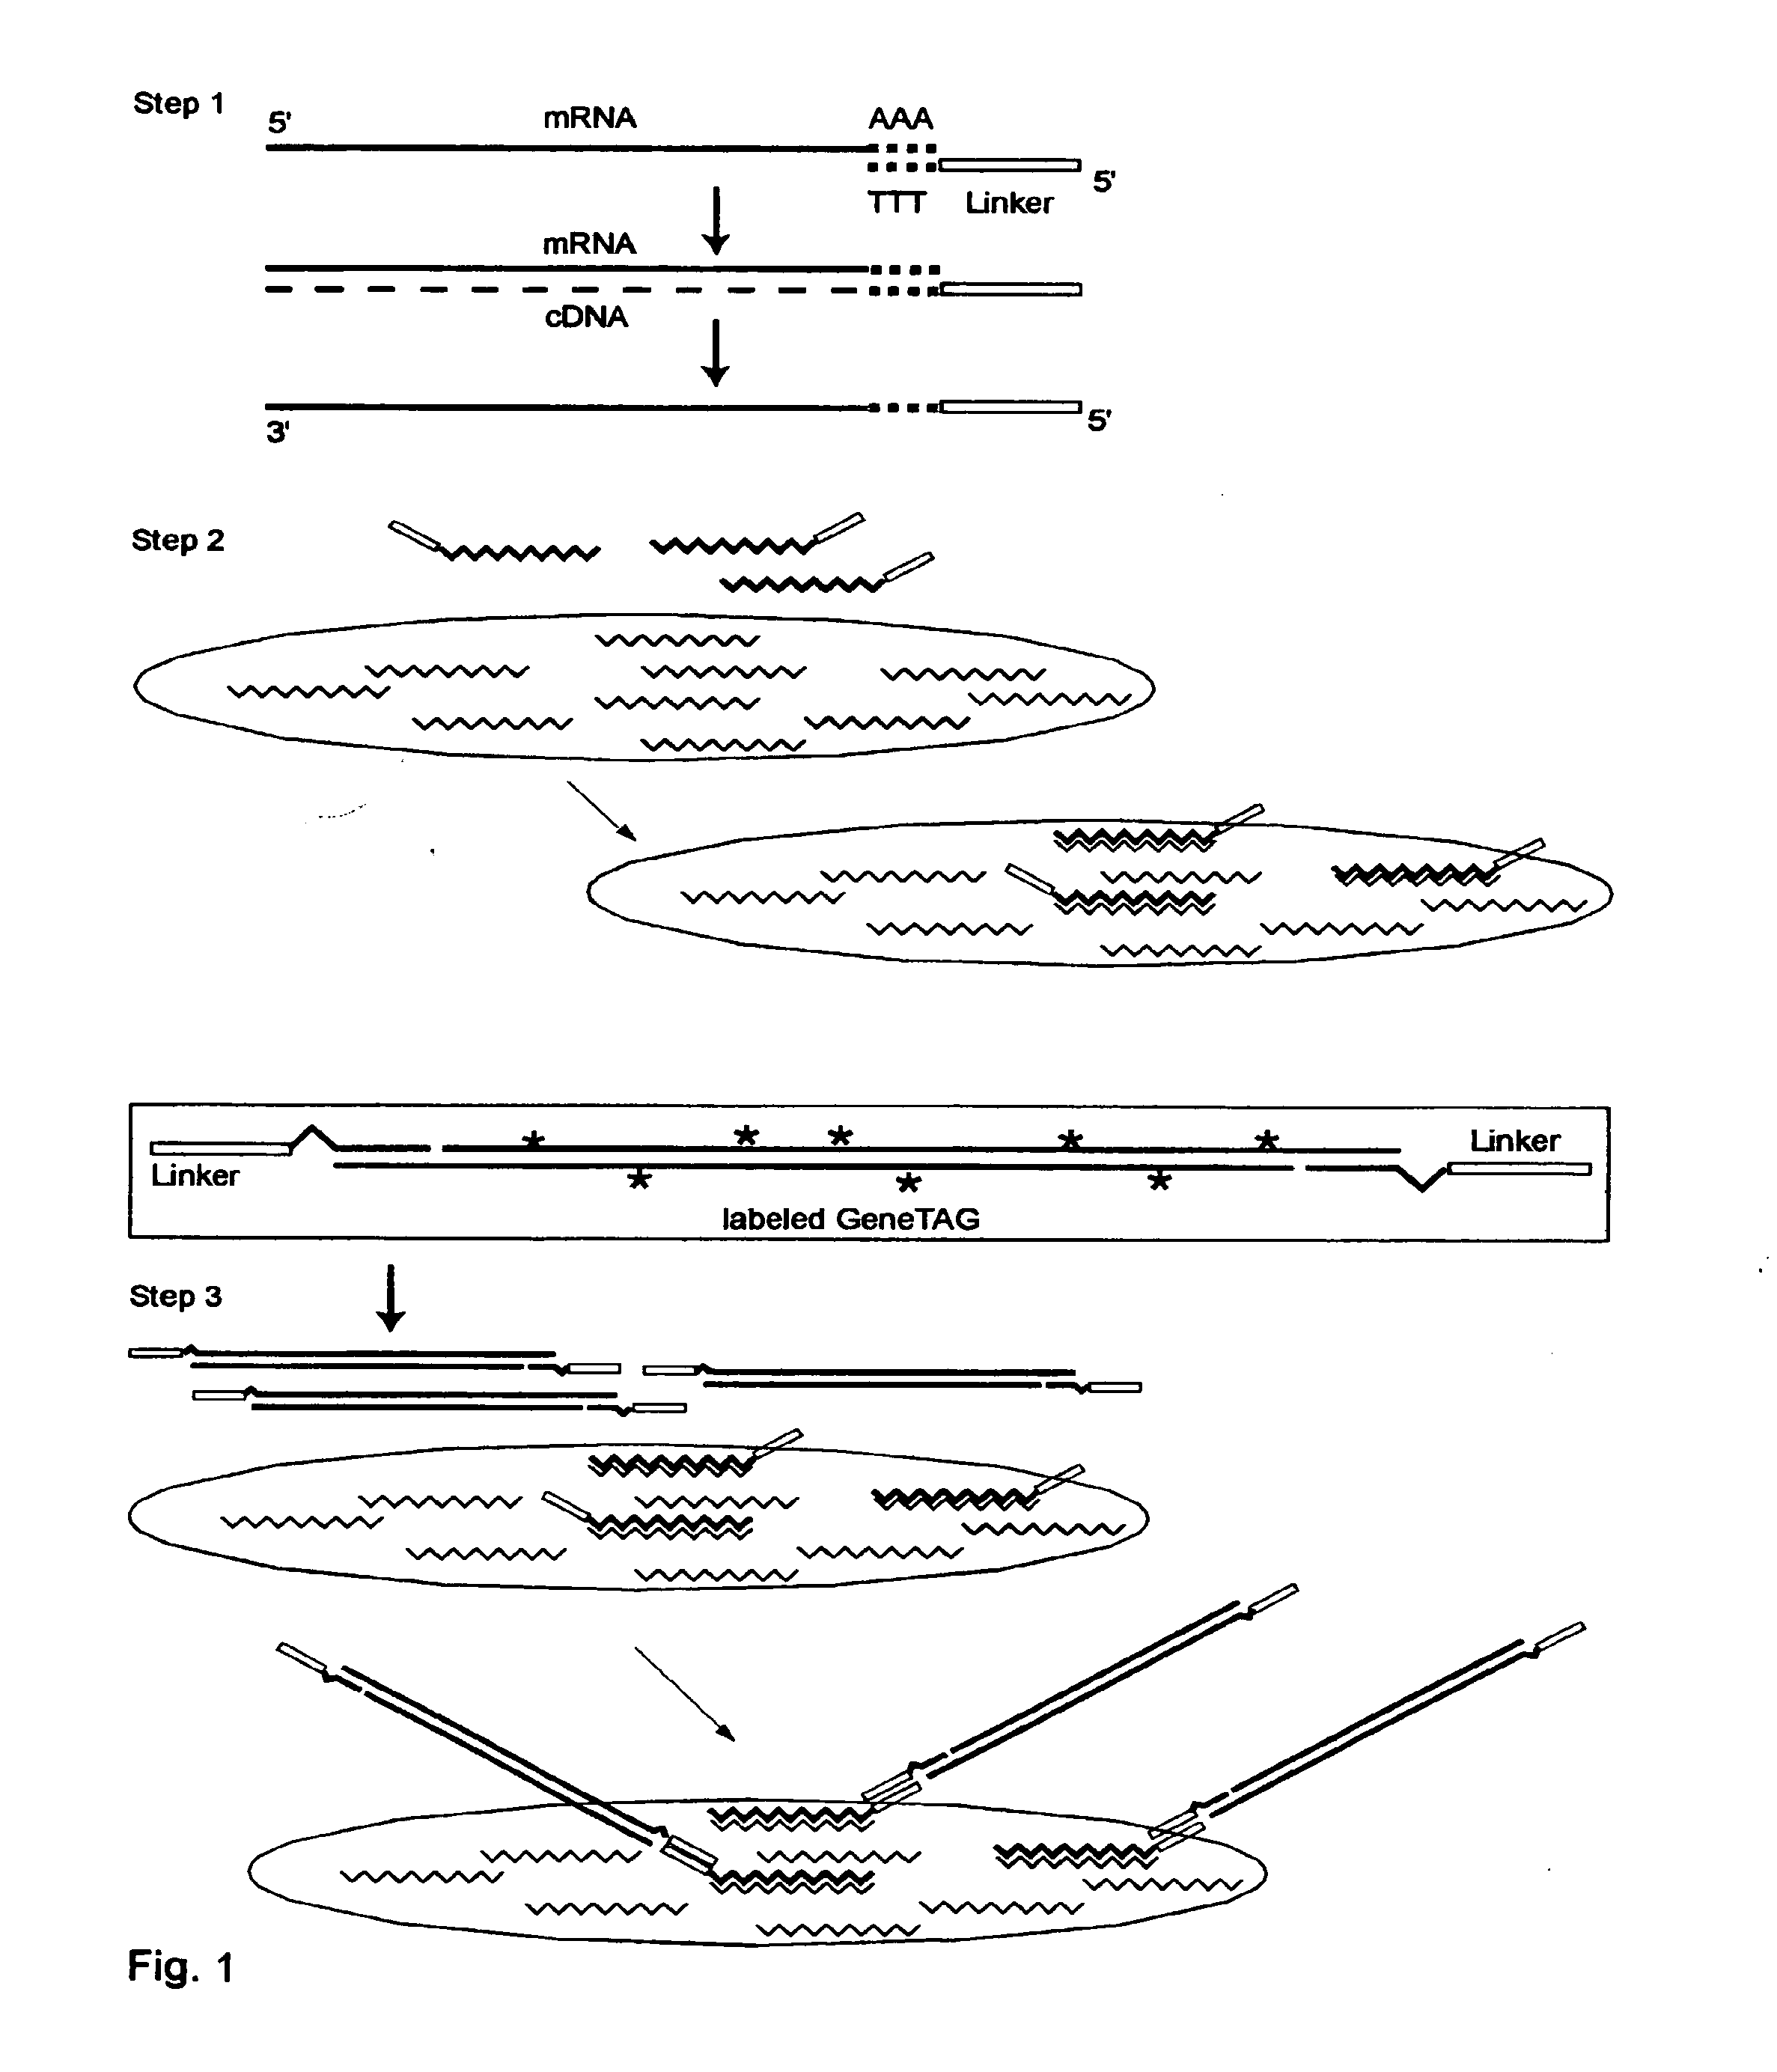 System and Methods to Quantify and Amplify Both Signaling and Probes for cDNA Chips and Gene Expression Microarrays